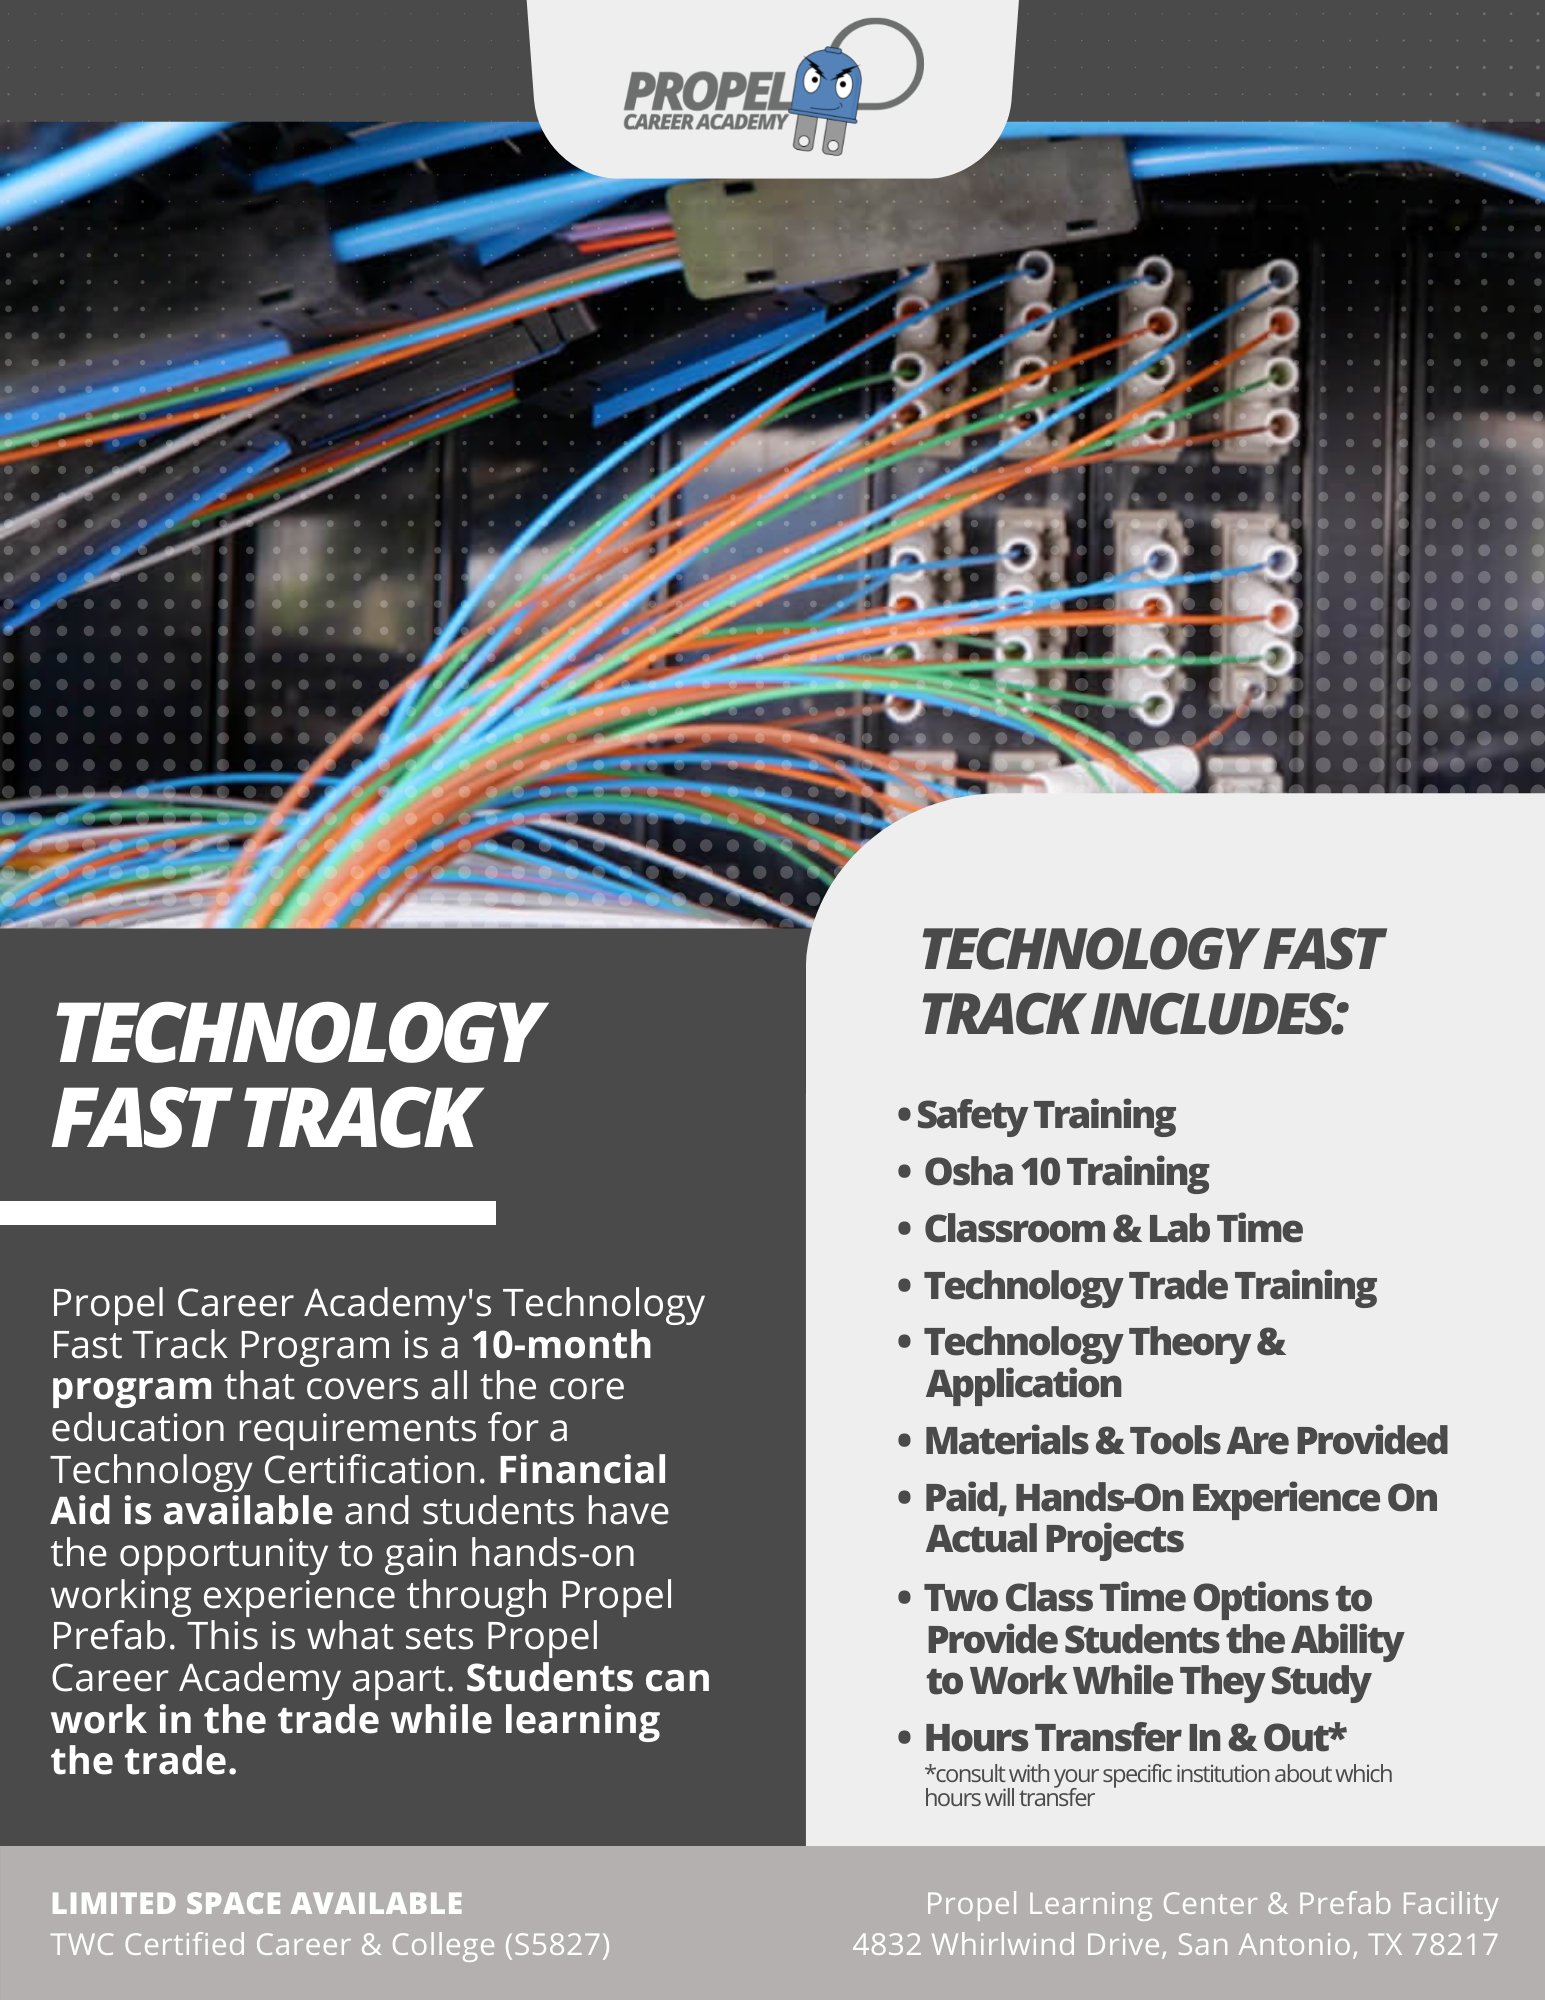 TECHNOLOGY FAST TRACK